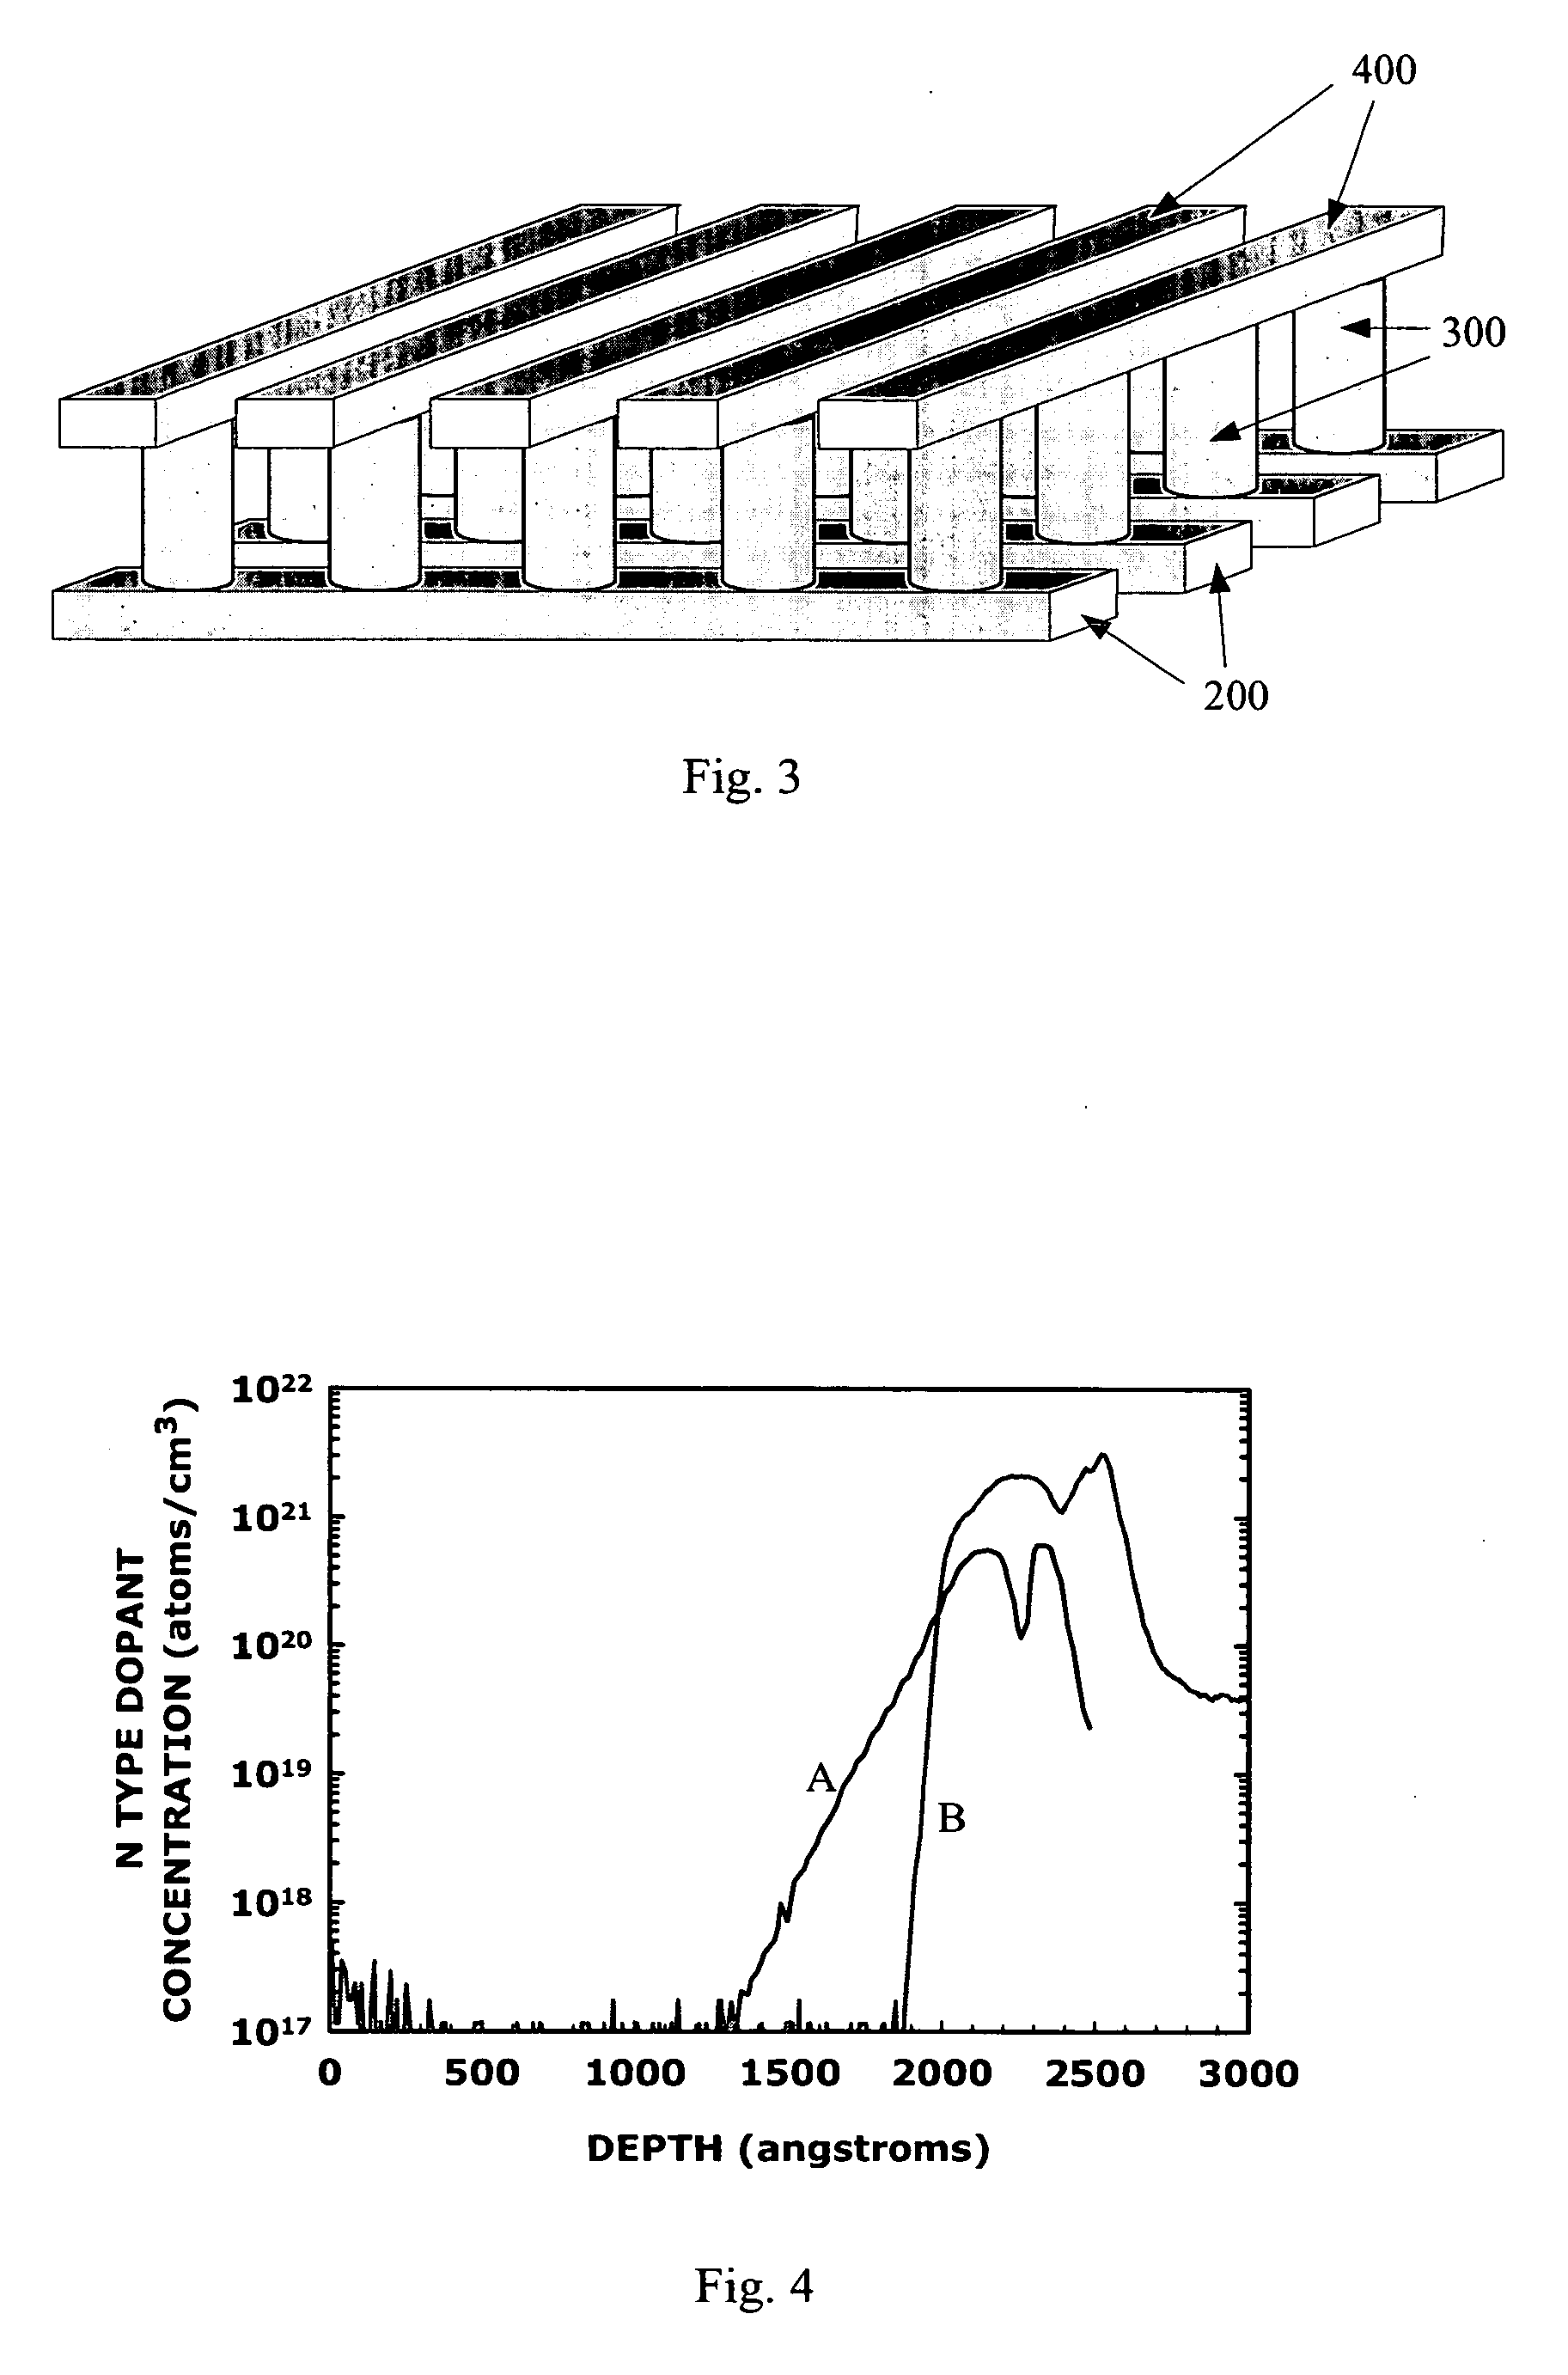 Vertical diode doped with antimony to avoid or limit dopant diffusion